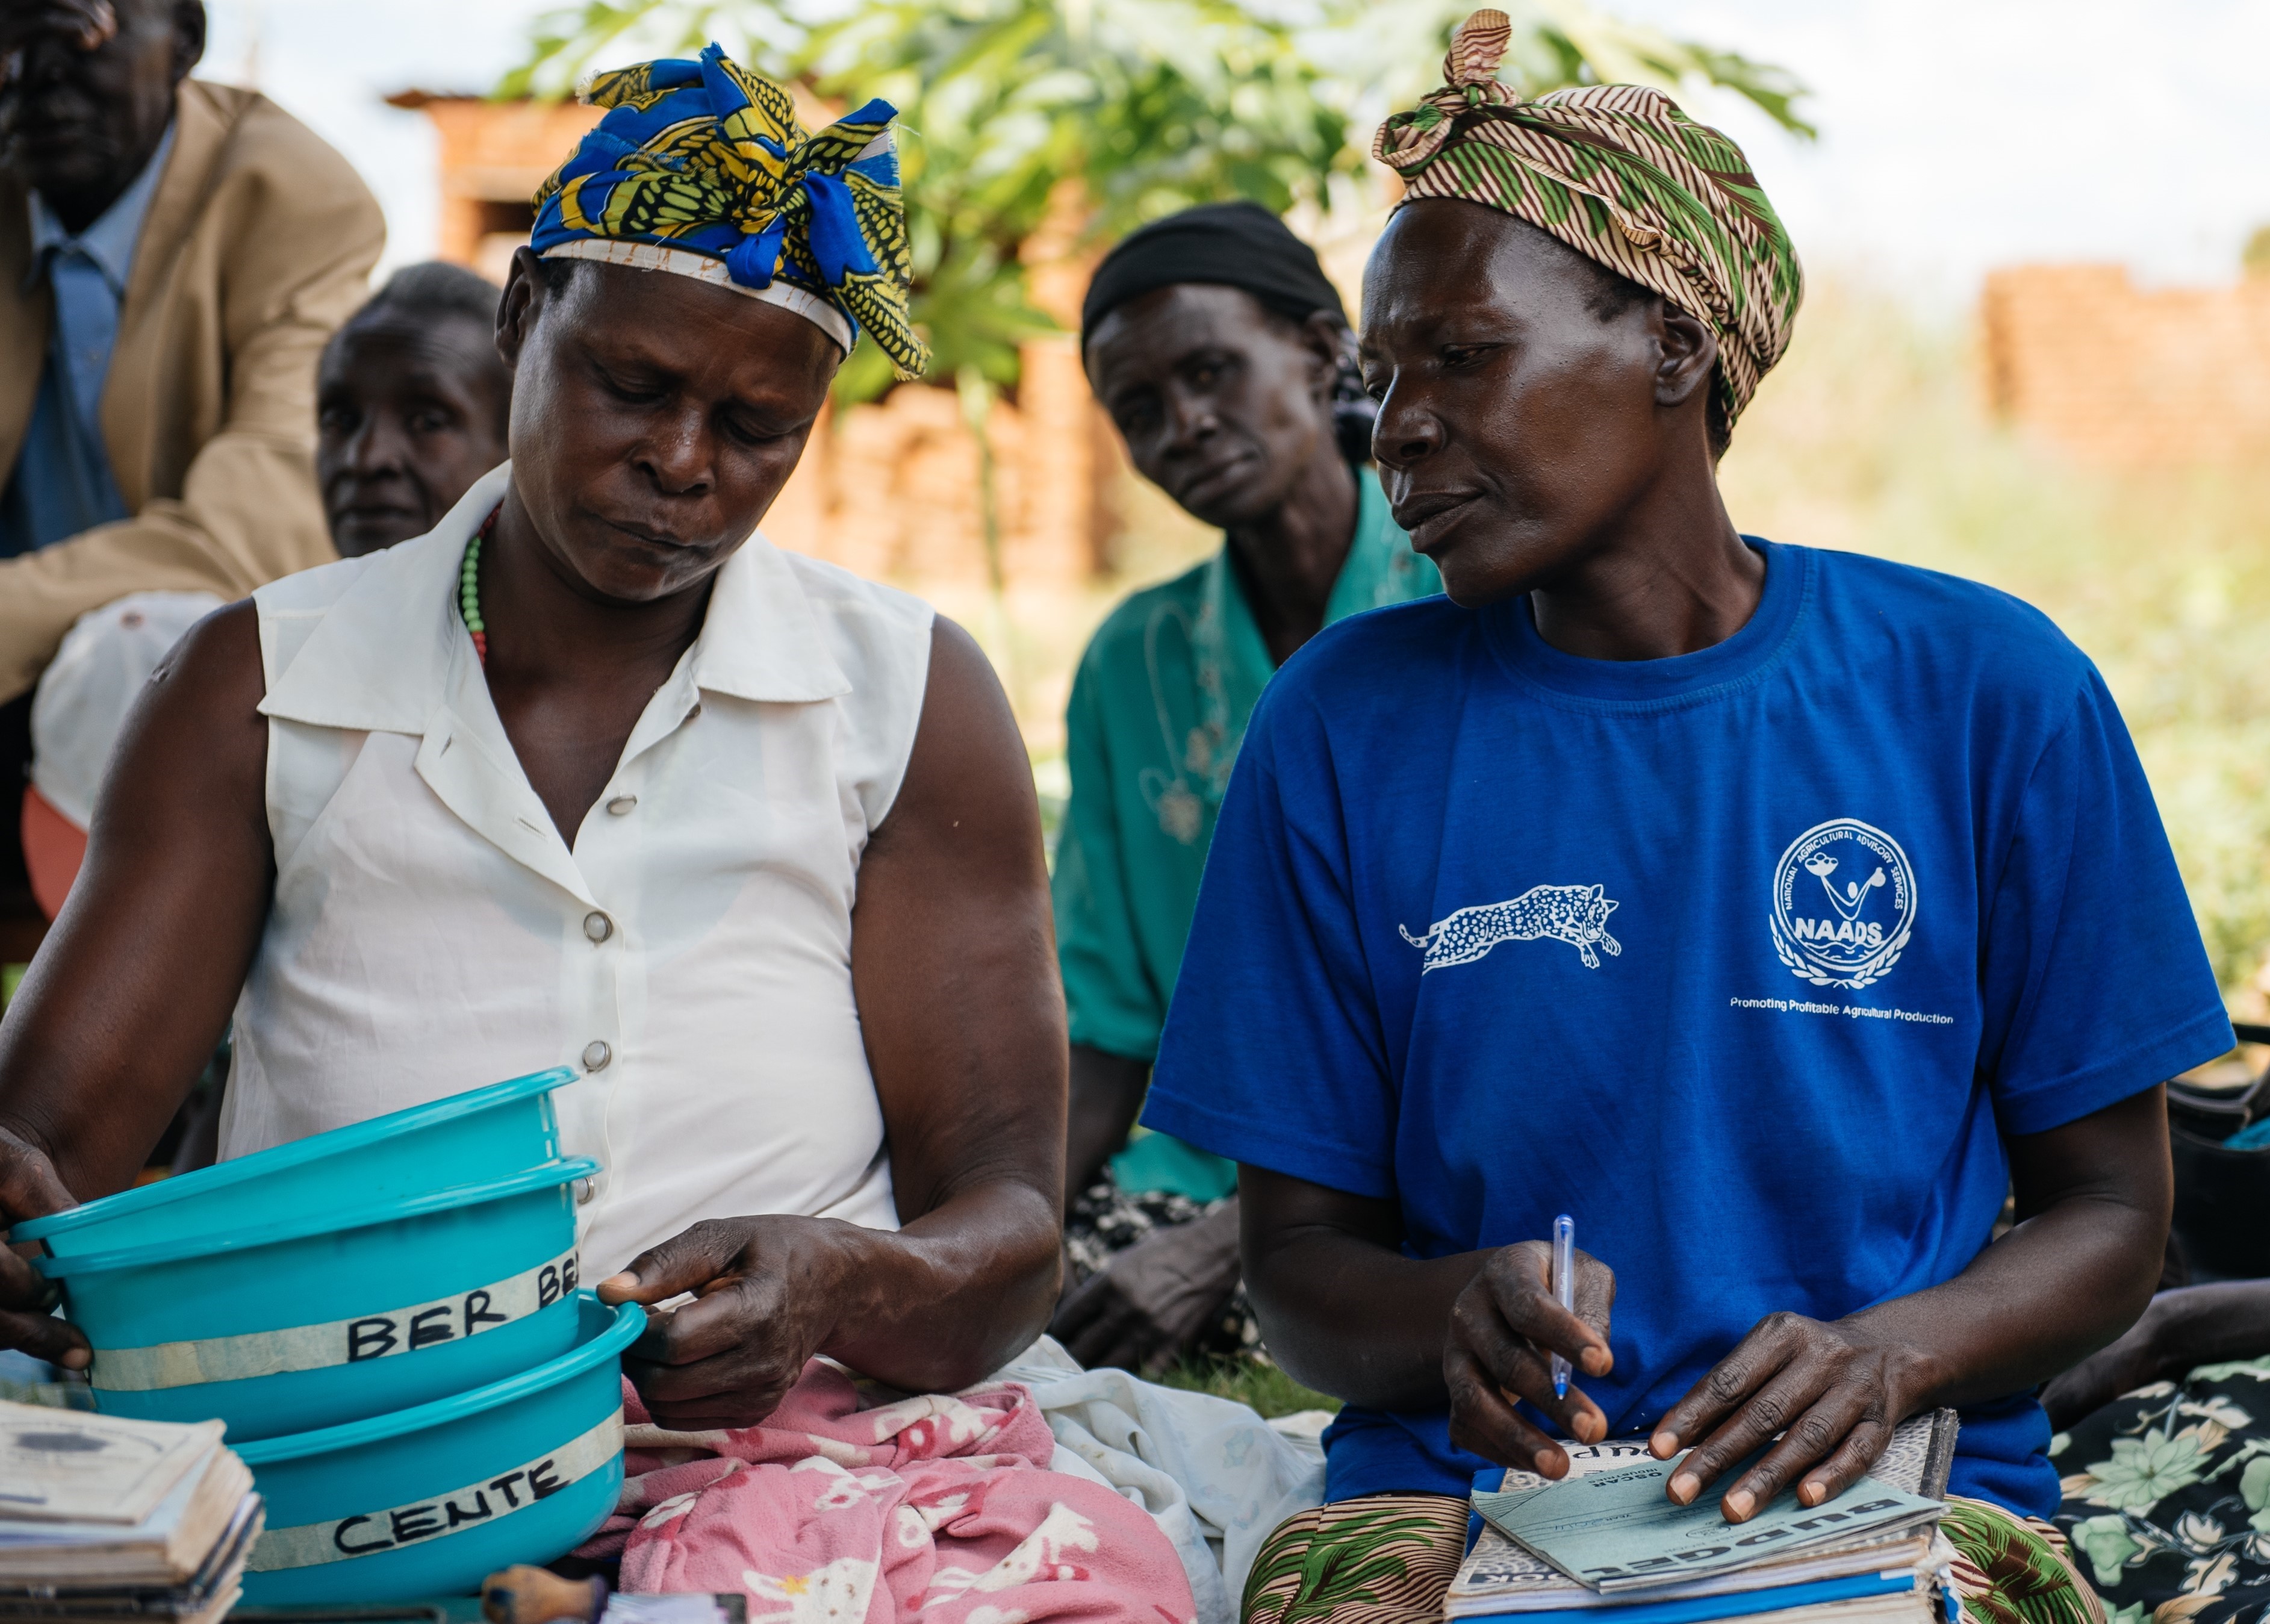 Women organizing savings buckets and notebooks, preparing for a village savings and loans group meeting in Uganda.